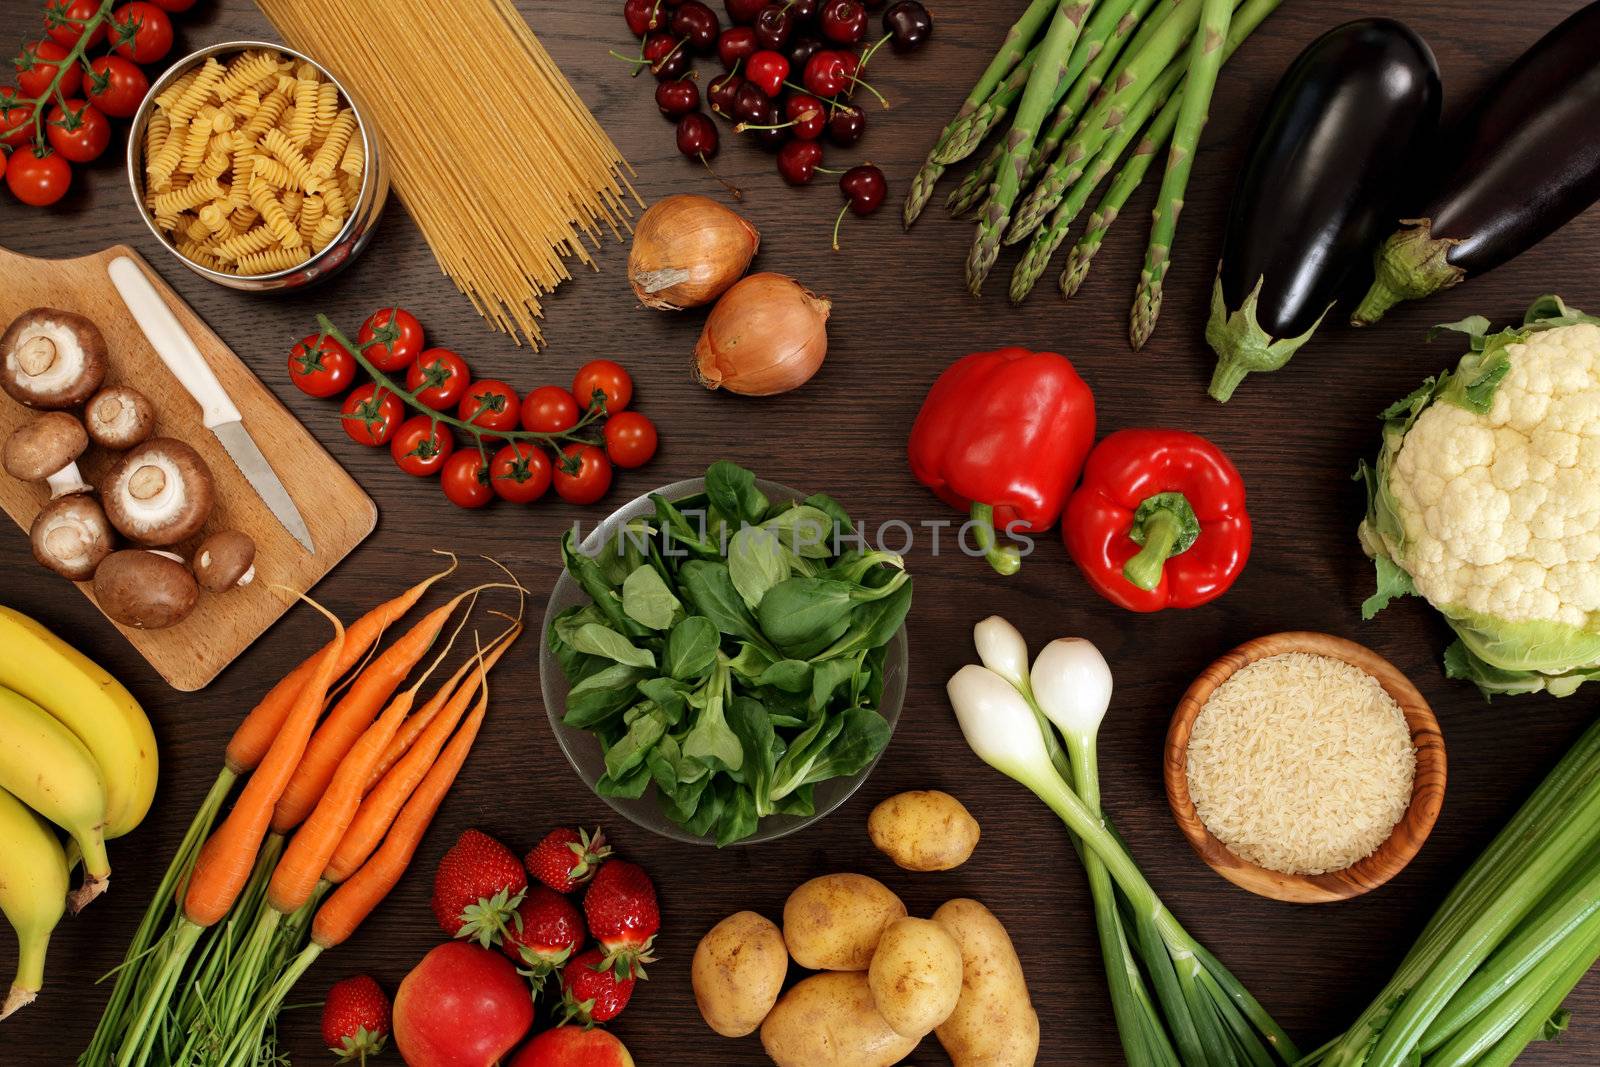 Photo of a table top full of fresh vegetables, fruit, and other healthy foods.